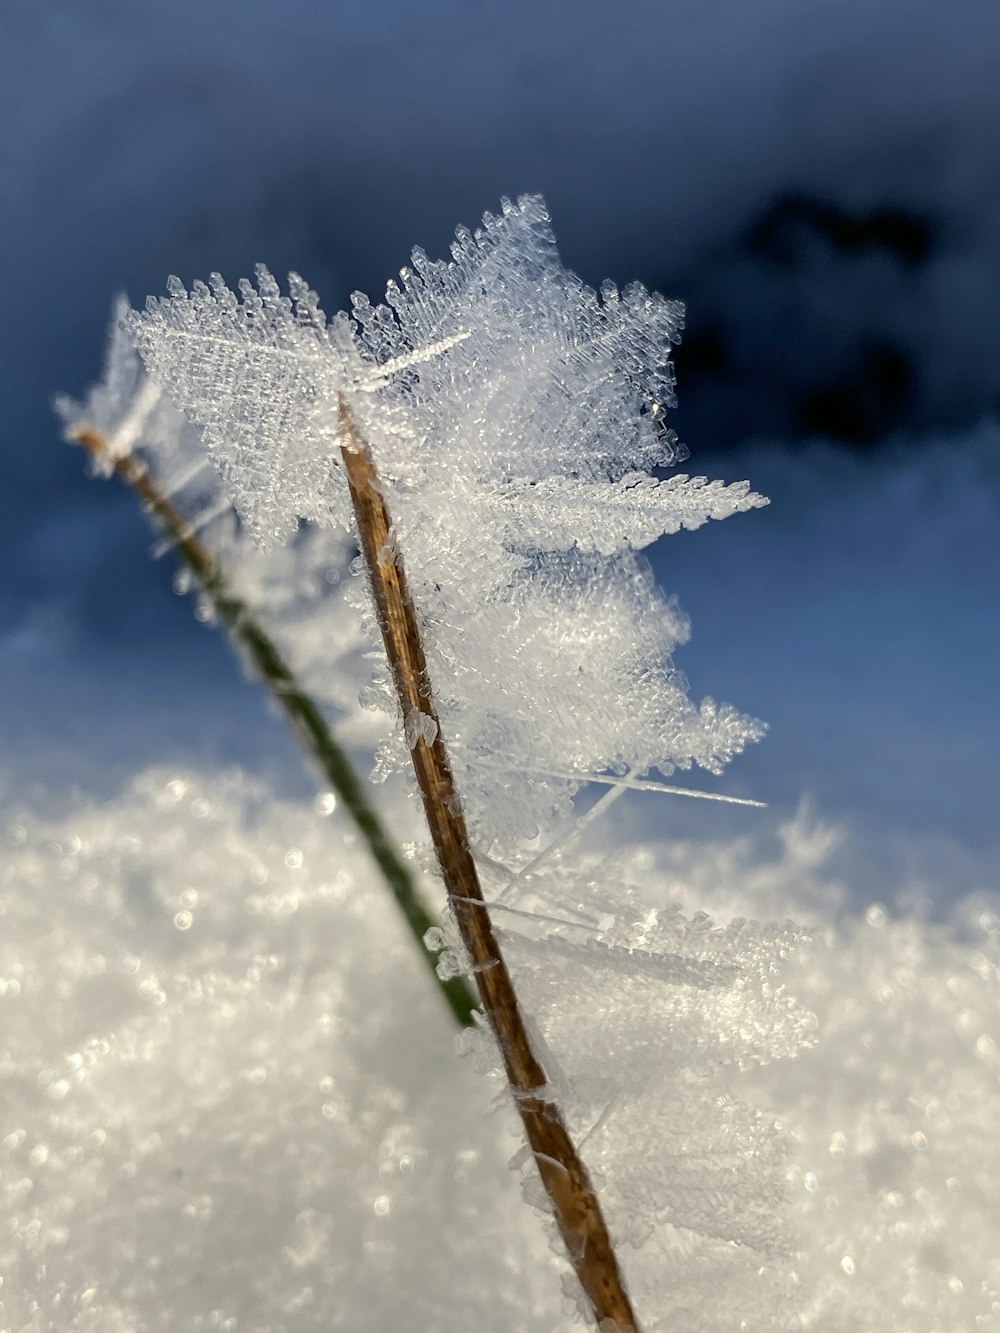 a frozen plant stem with water droplets on it